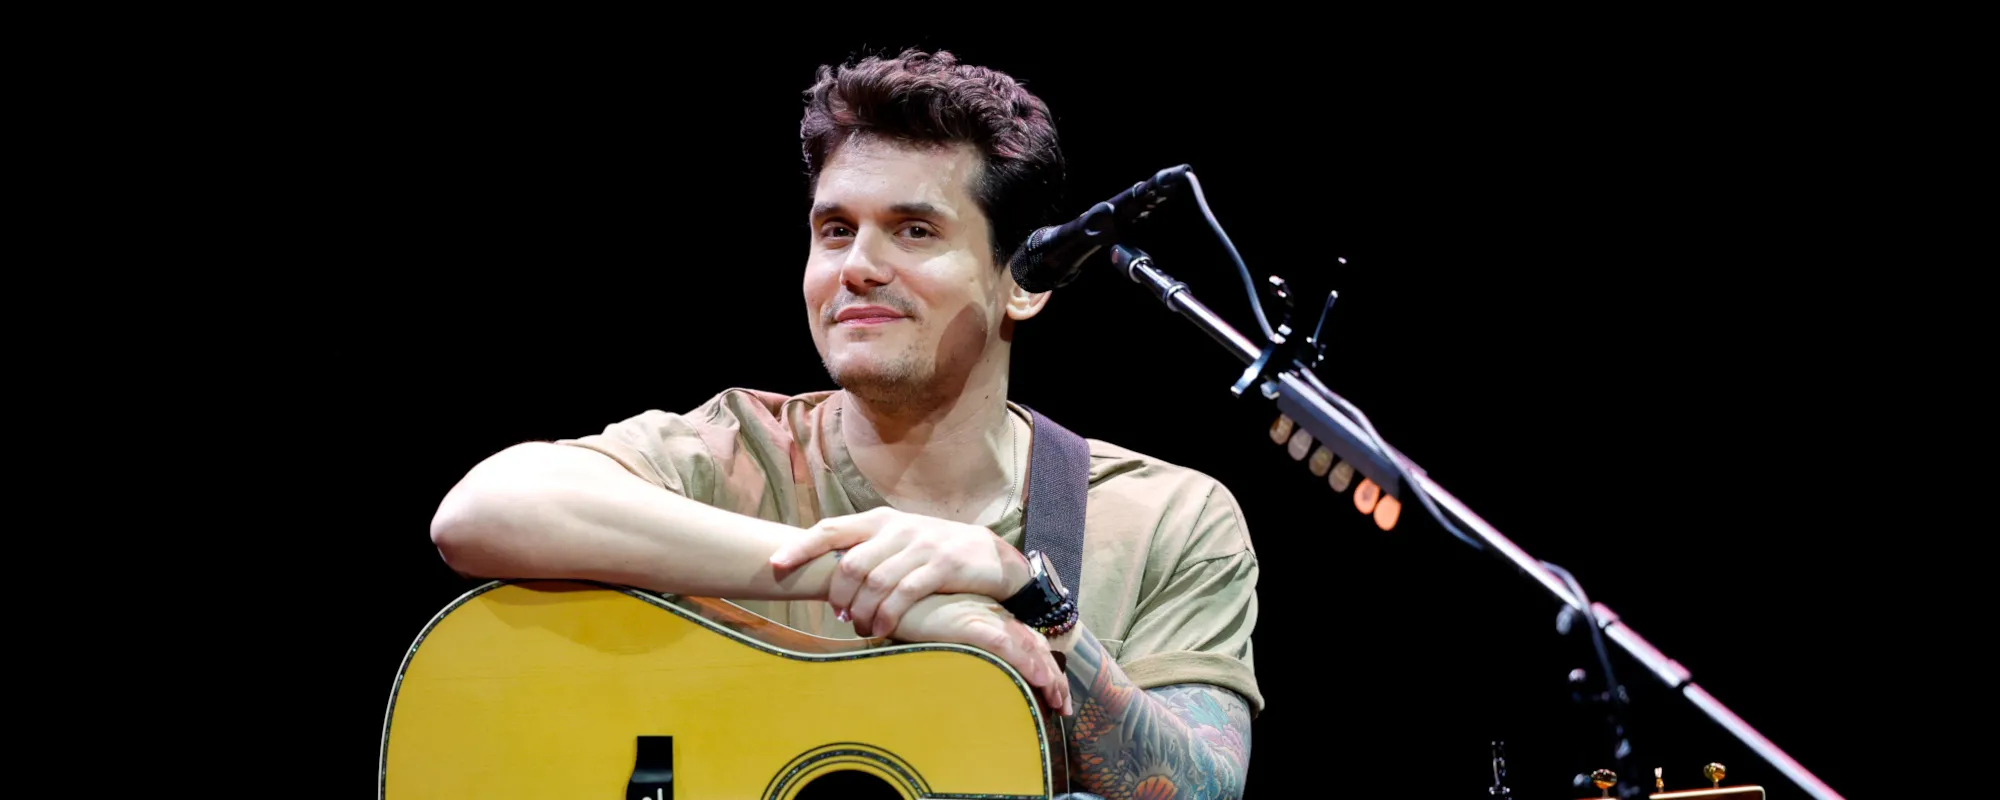 John Mayer Weighs the Odds Dead & Company Will Perform Together Again